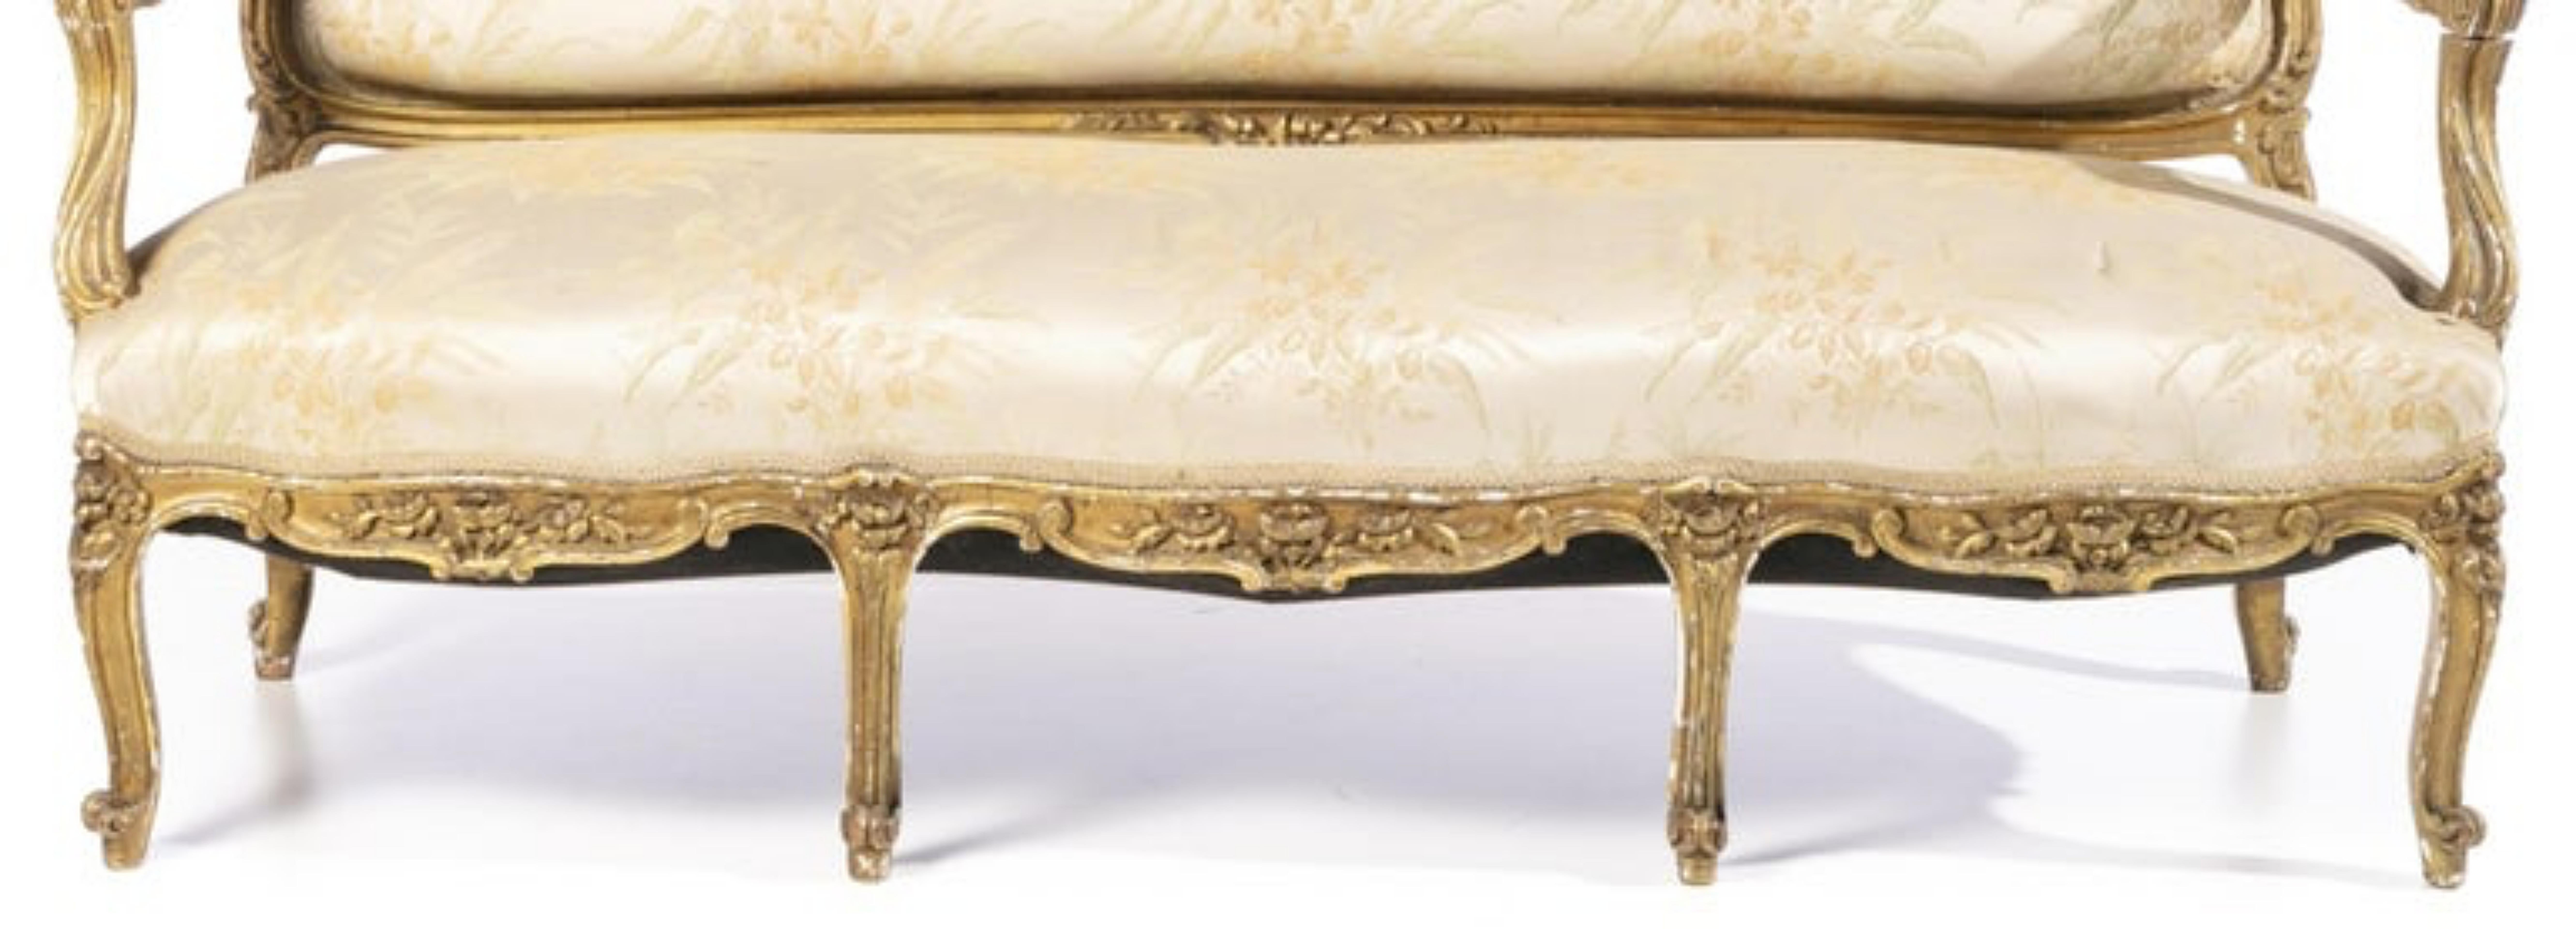 Hand-Crafted Beautiful French Canape 18th Century For Sale